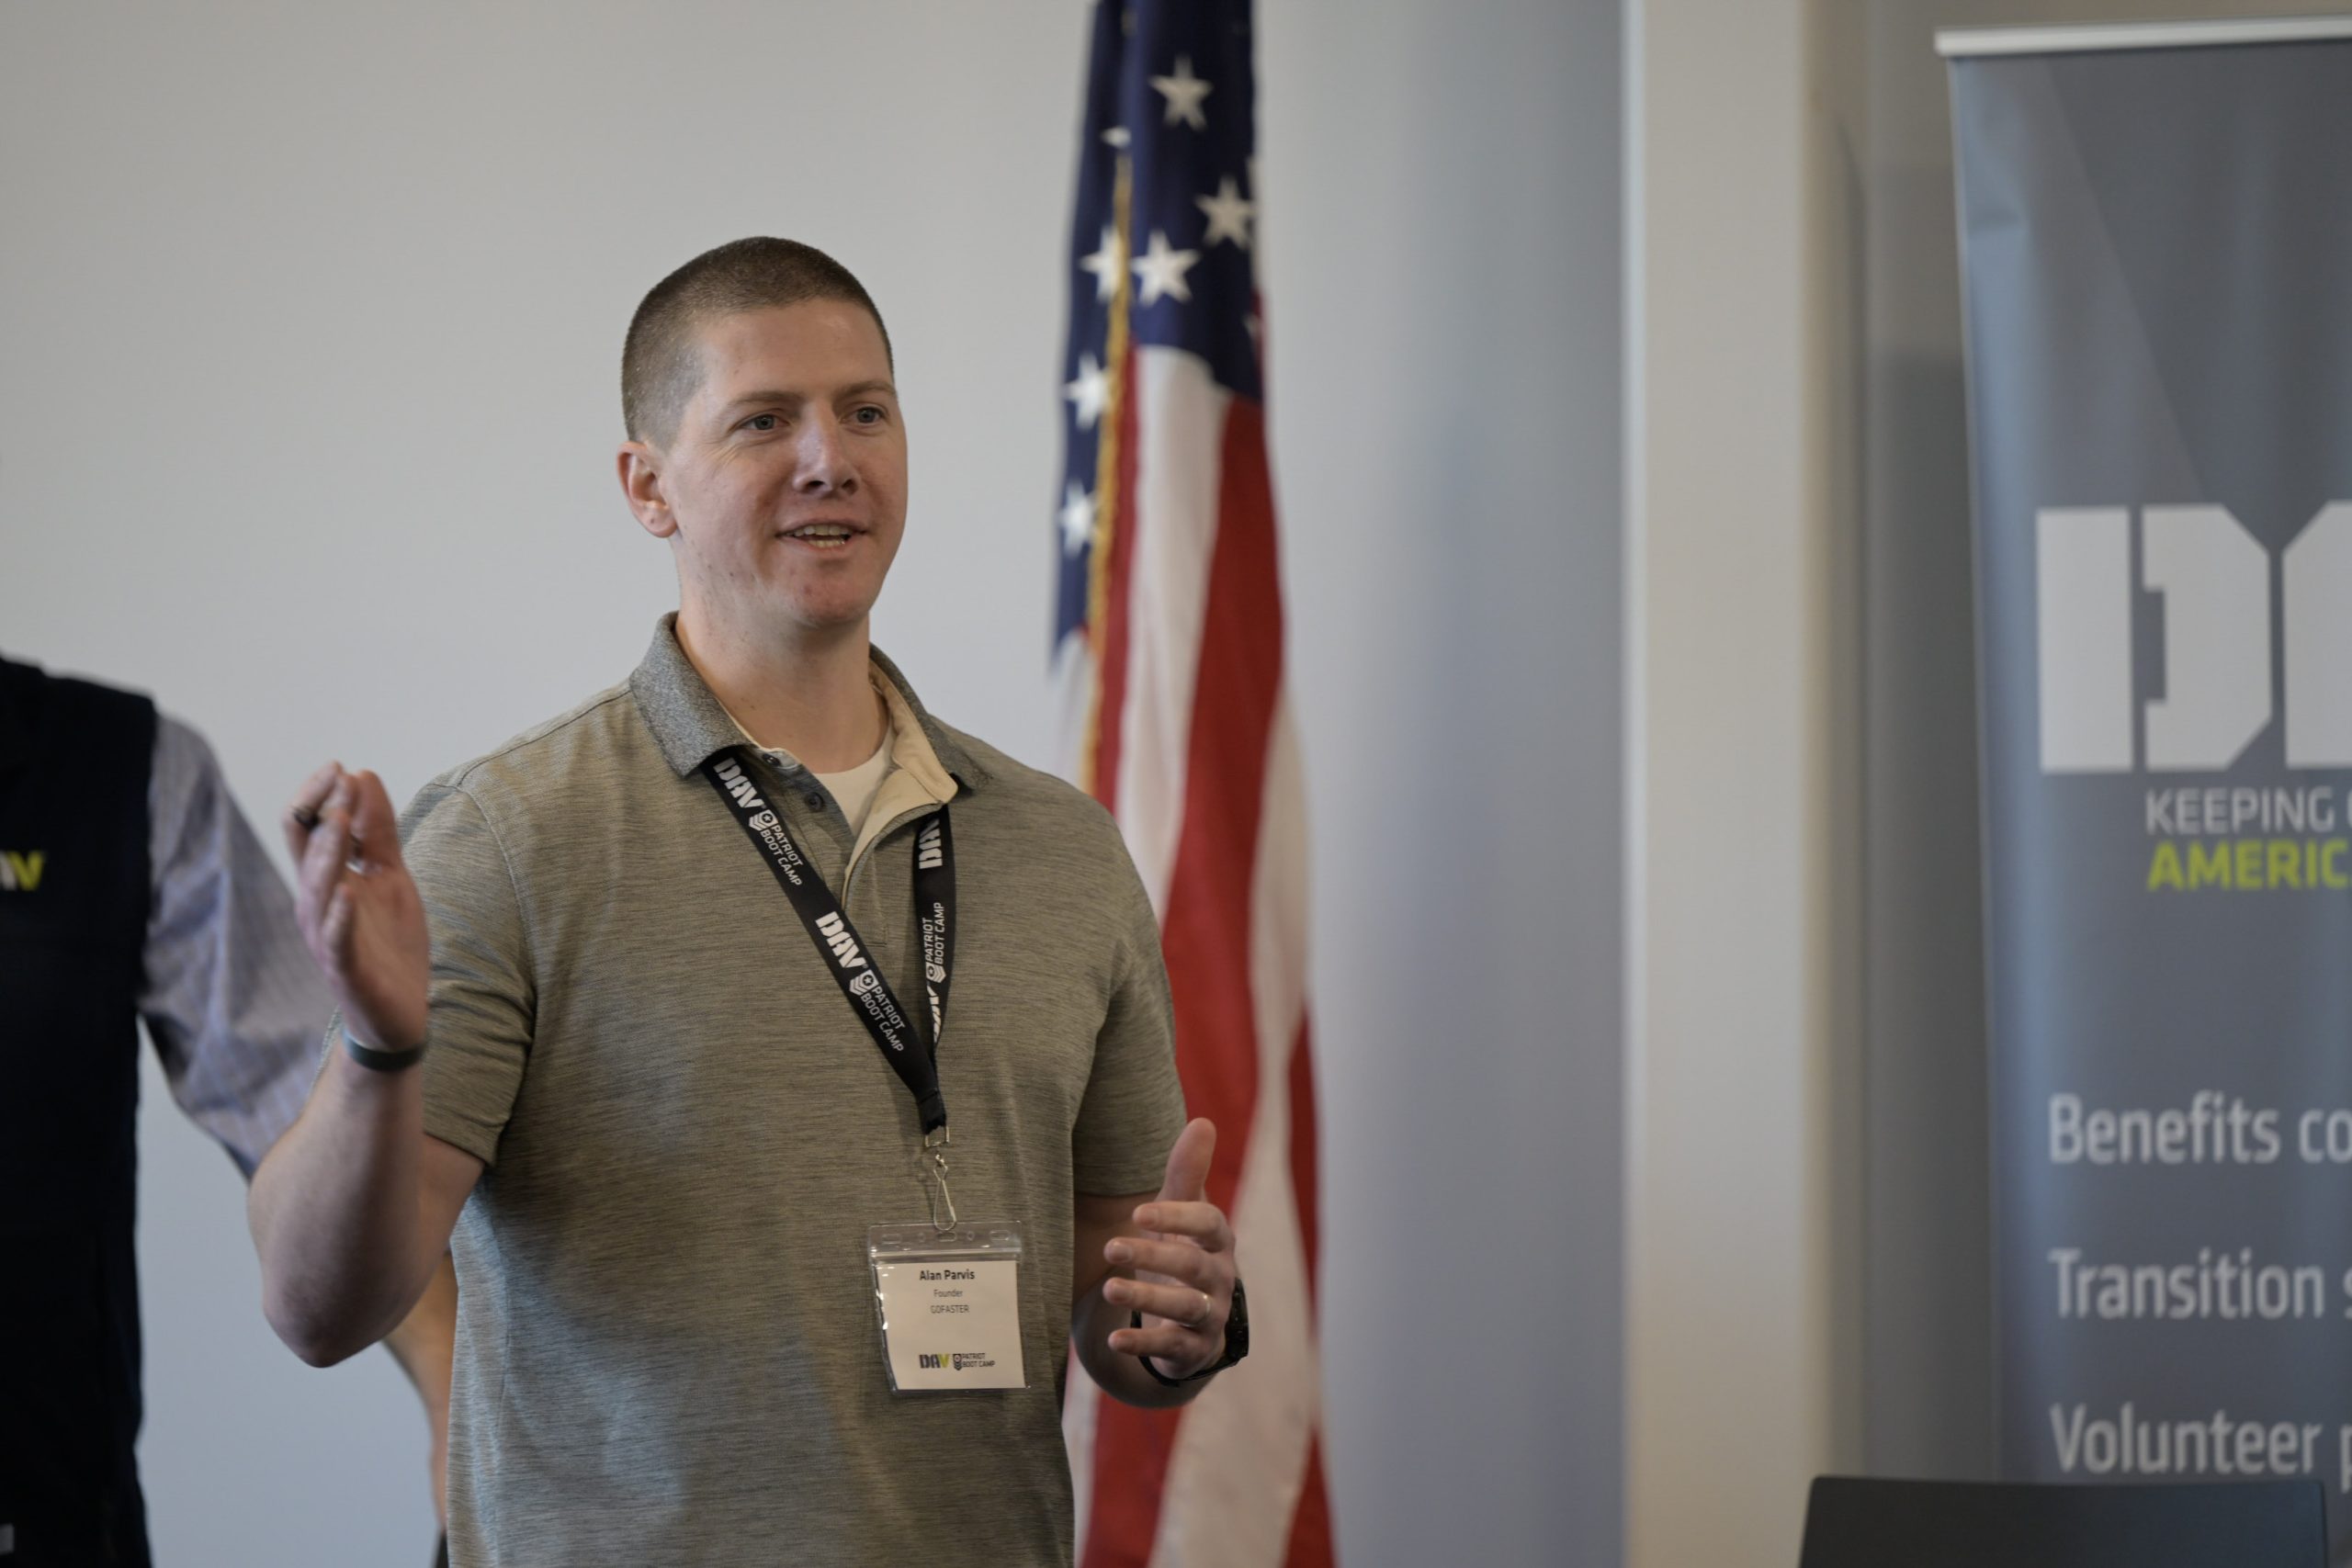 Continue reading Vetrepreneur has ‘empowering’ experience at DAV Patriot Boot Camp. Learn how you can, too.